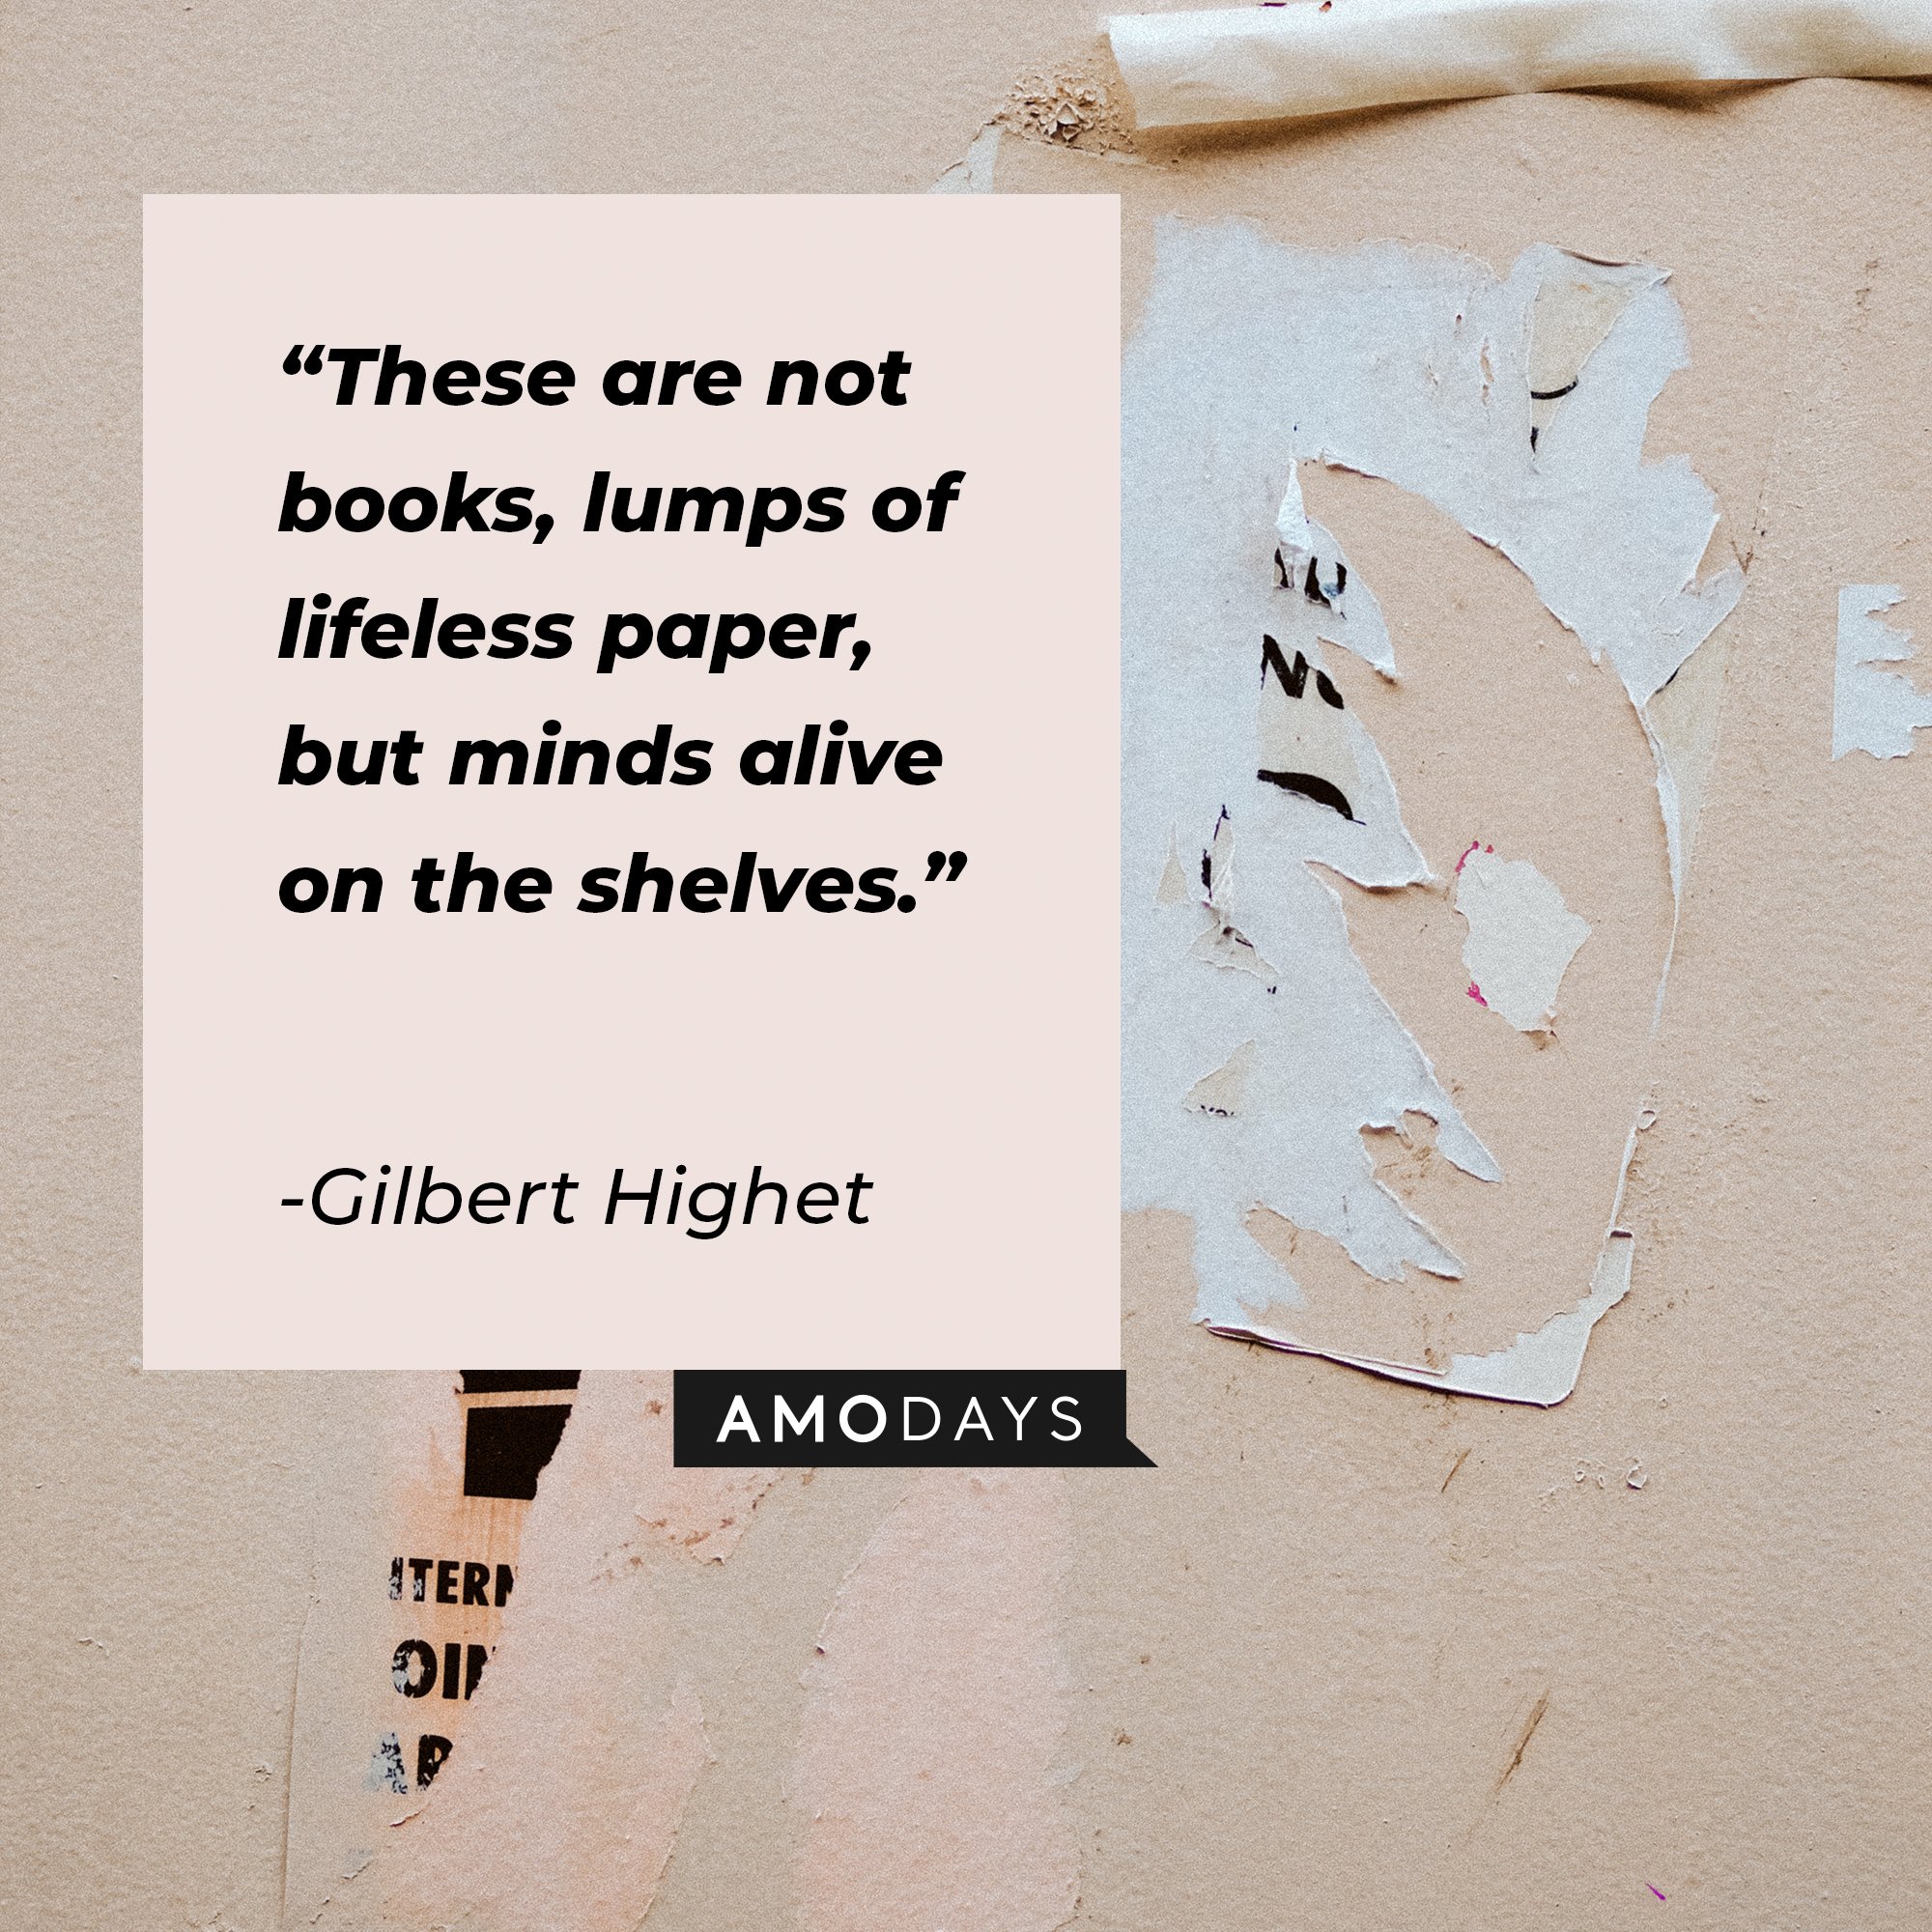  Gilbert Highet’s quote: "These are not books, lumps of lifeless paper, but minds alive on the shelves." | Image: AmoDays